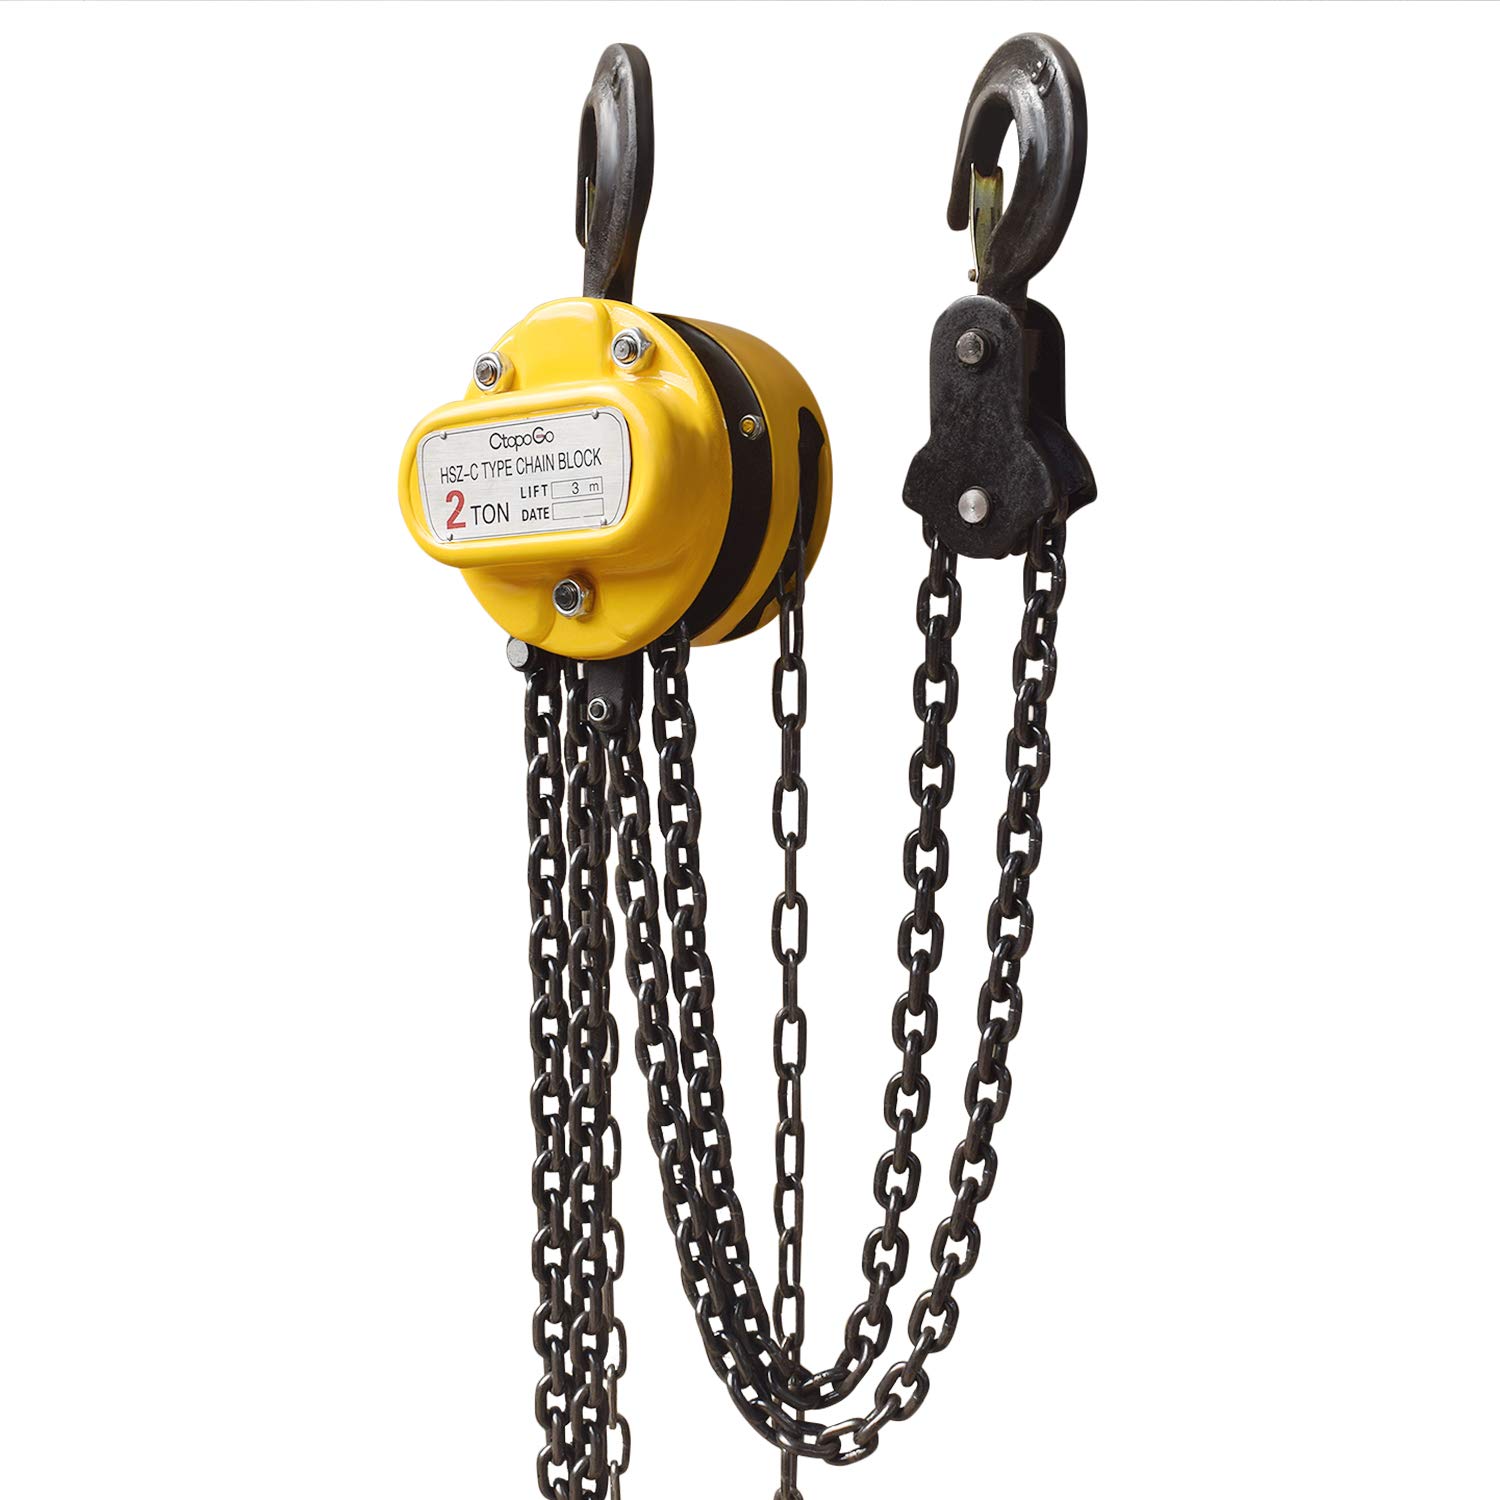 Heavy Duty Alloy Steel 1 Ton 2200Lbs Capacity Manual Hand Engine Lever Block Chain Hoist Pulley Tackle Hoist Winch Lift W/Hook 1 Ton 10FT Lift Red